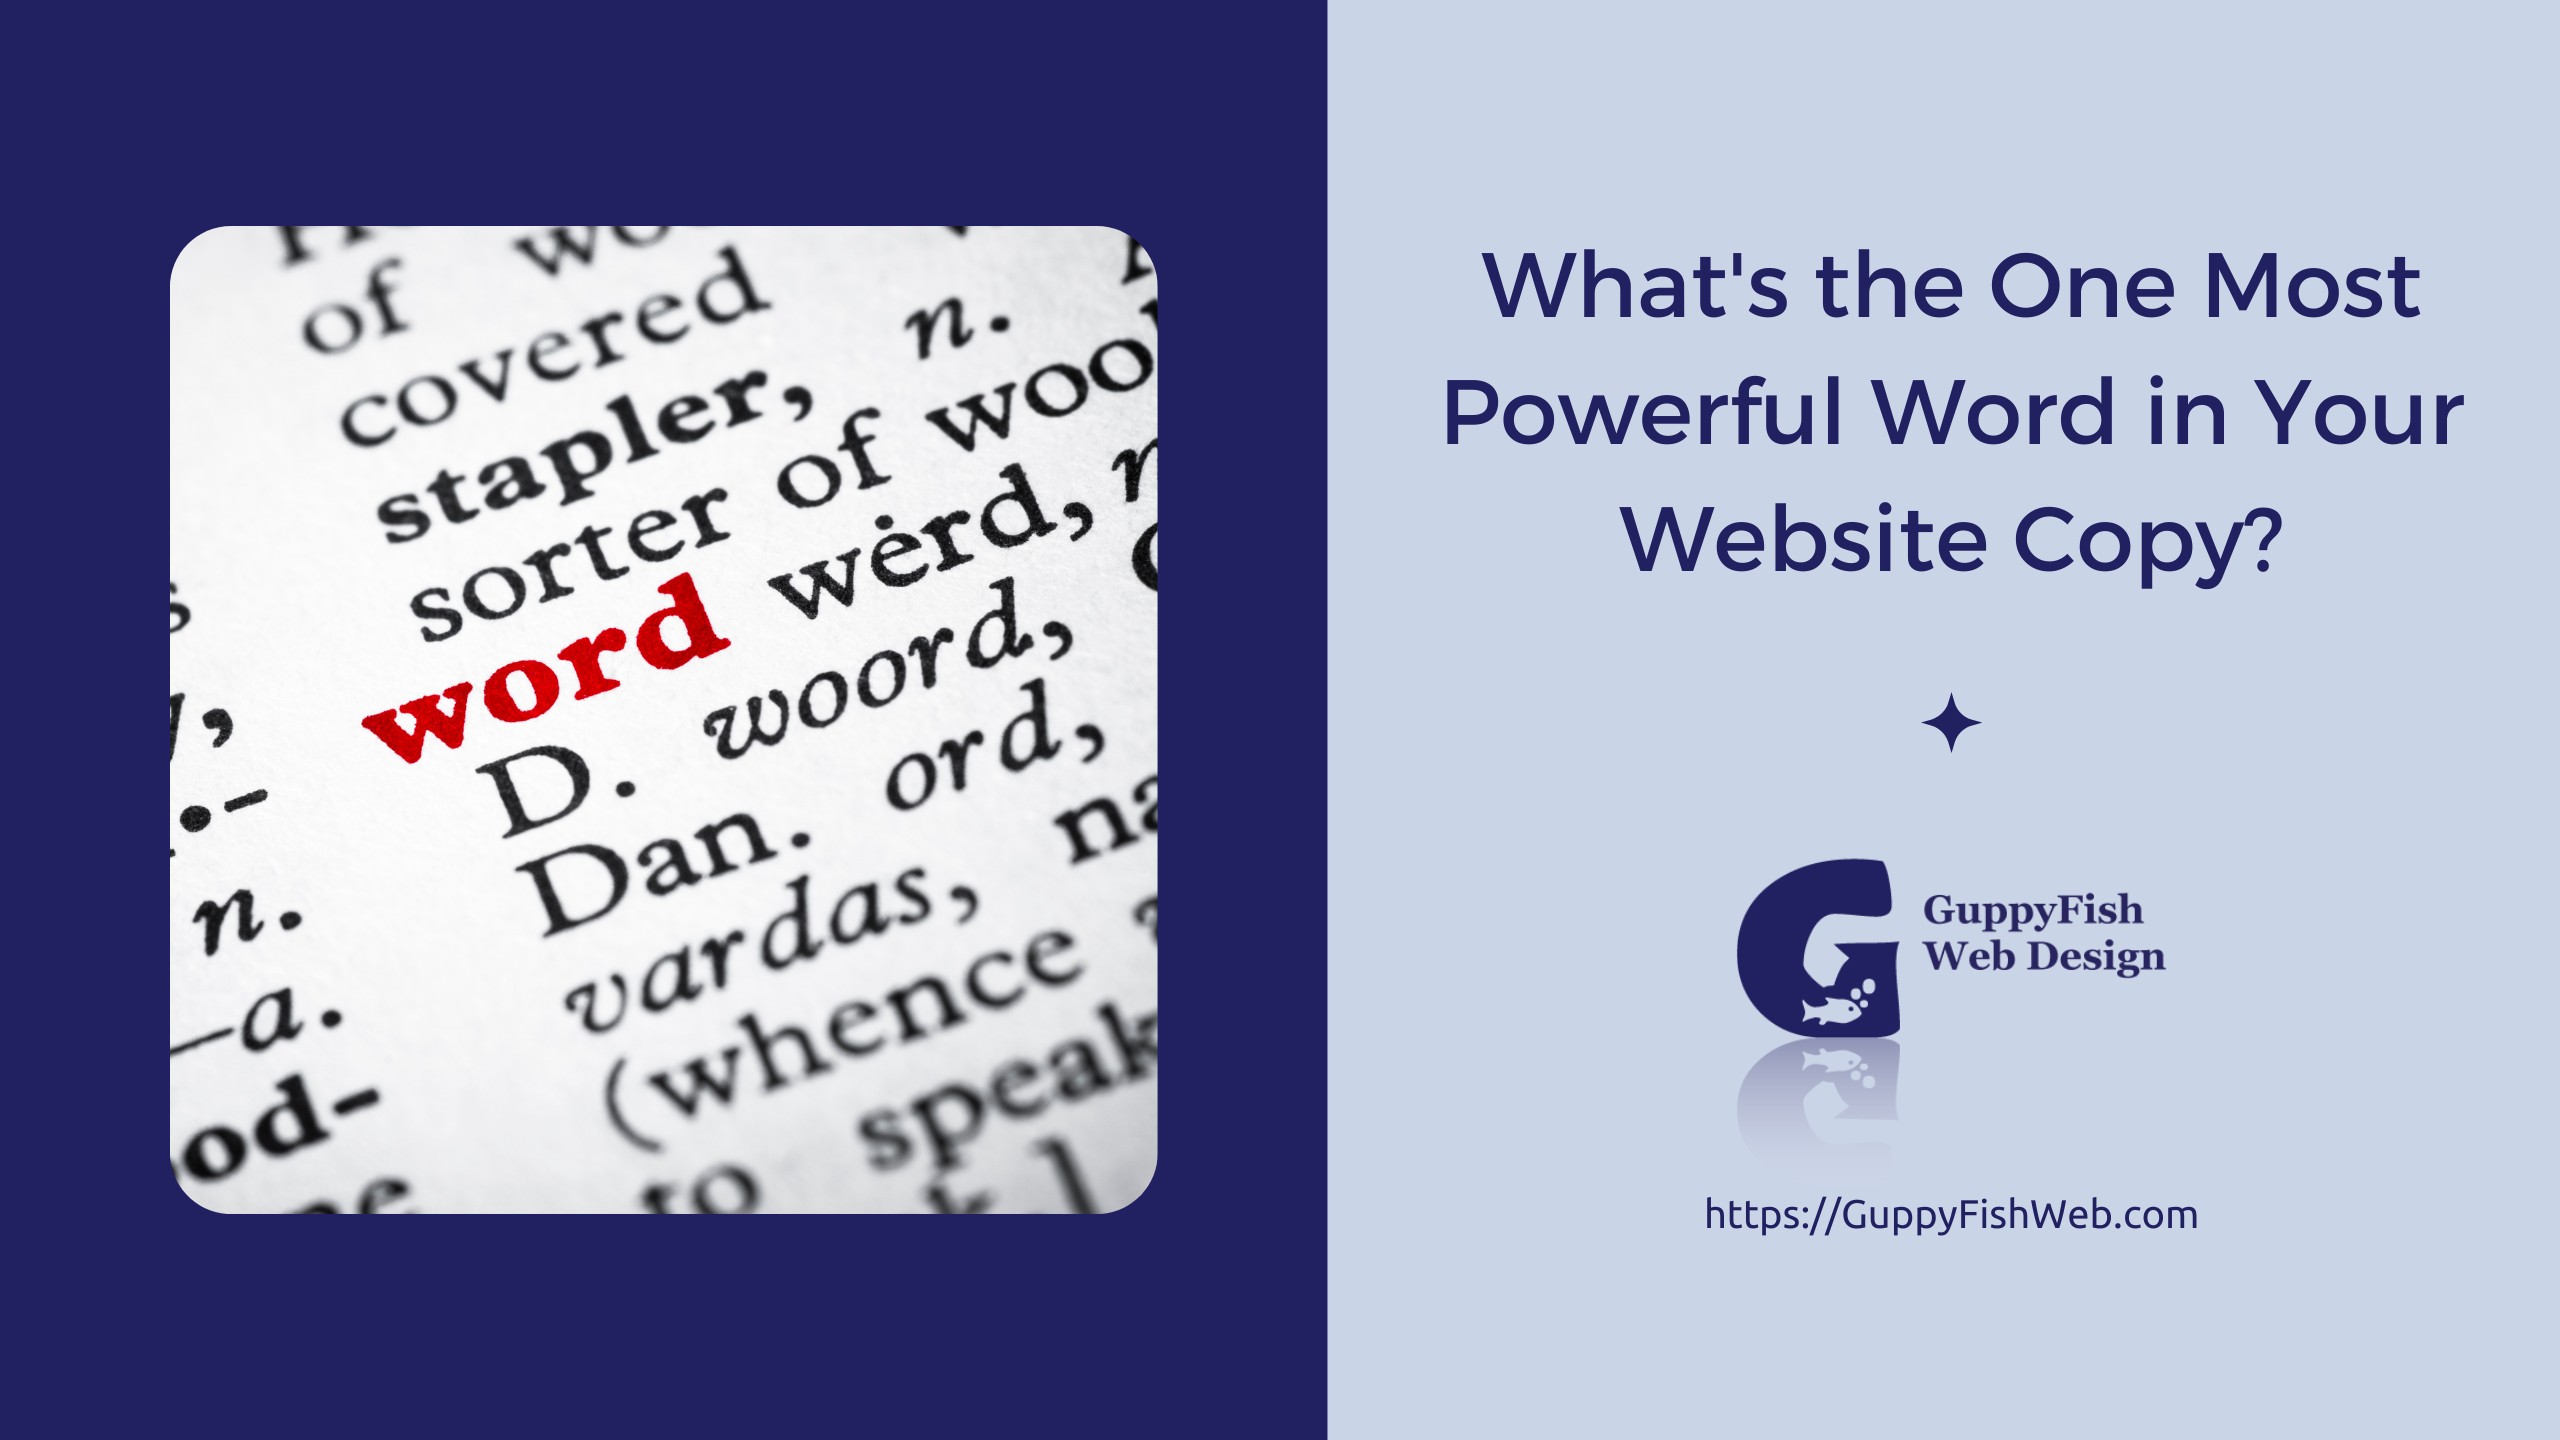 What's the One Most Powerful Word in Your Website Copy?